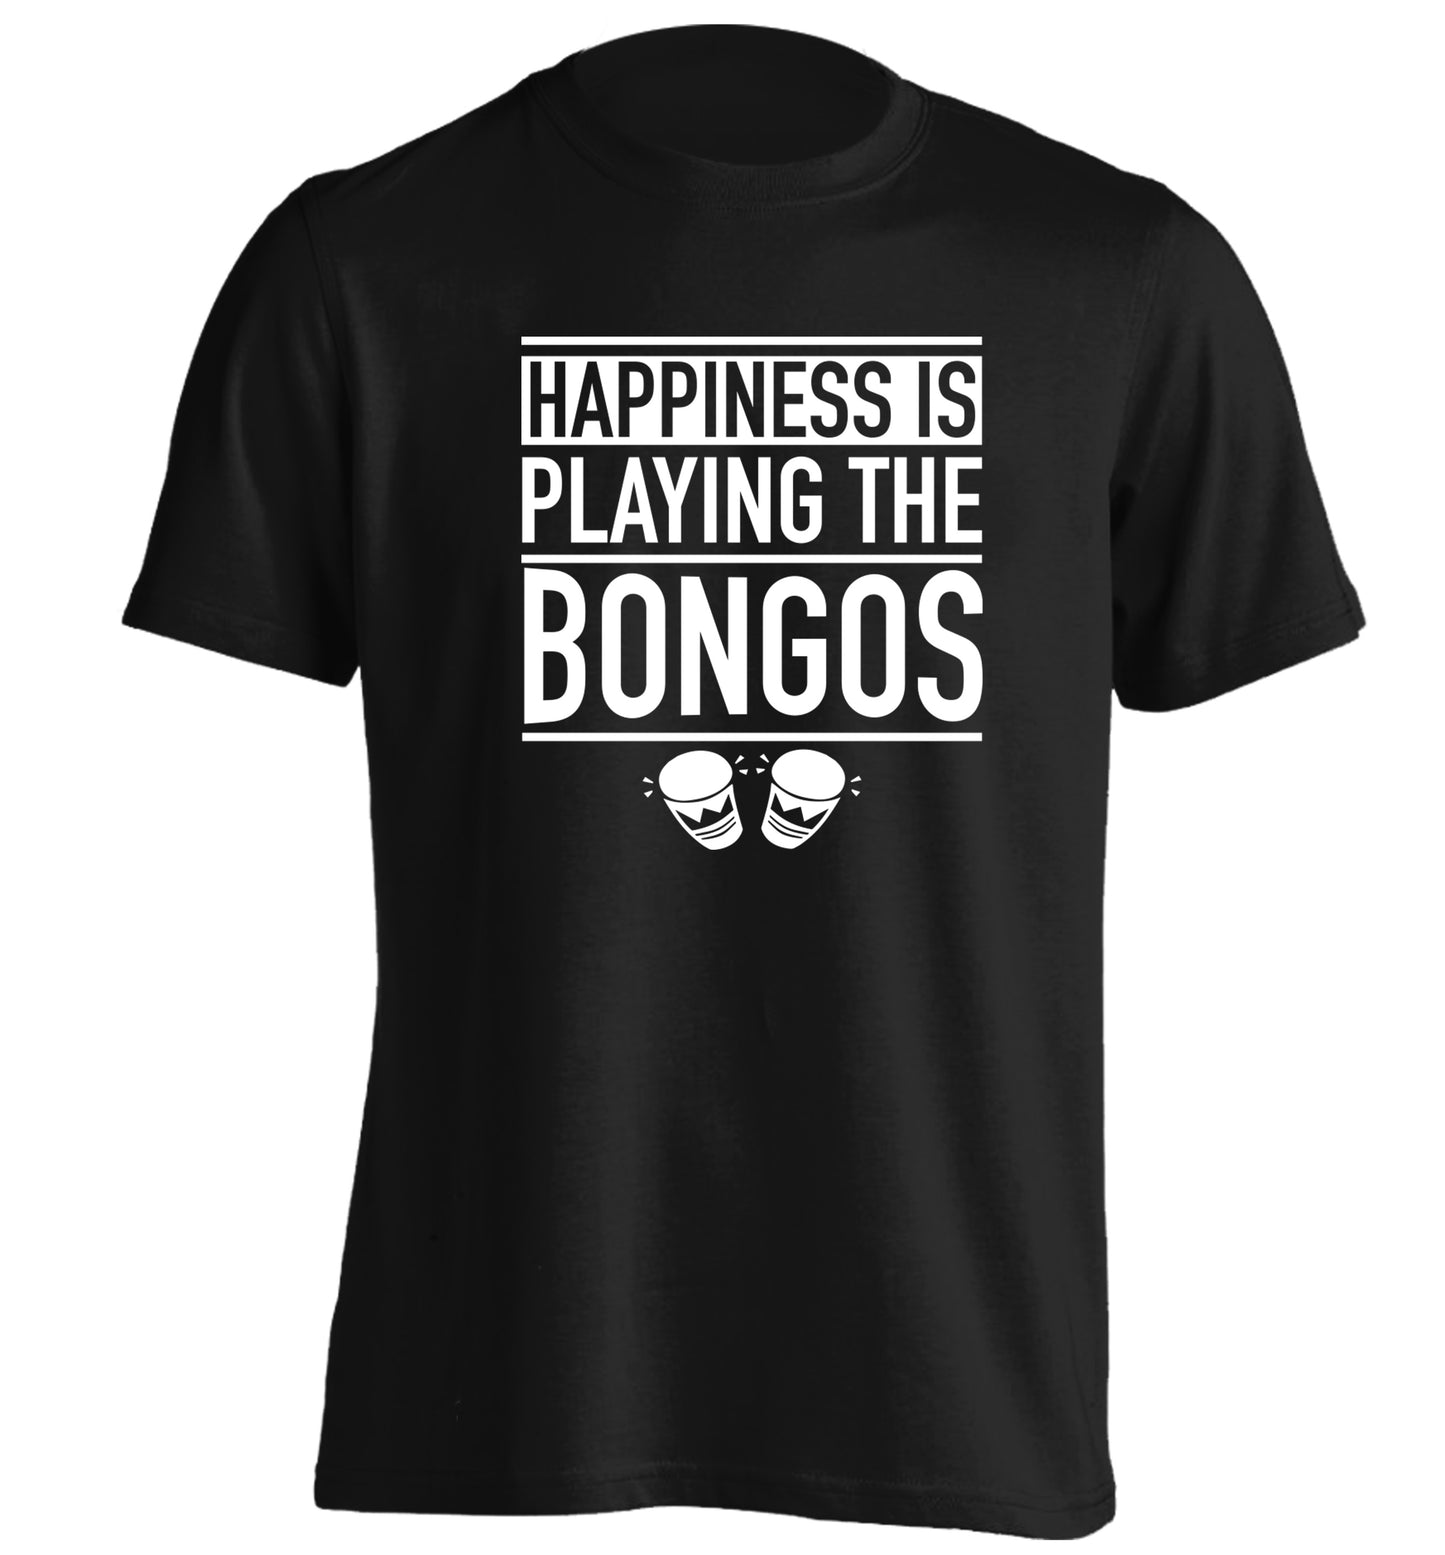 Happiness is playing the bongos adults unisex black Tshirt 2XL